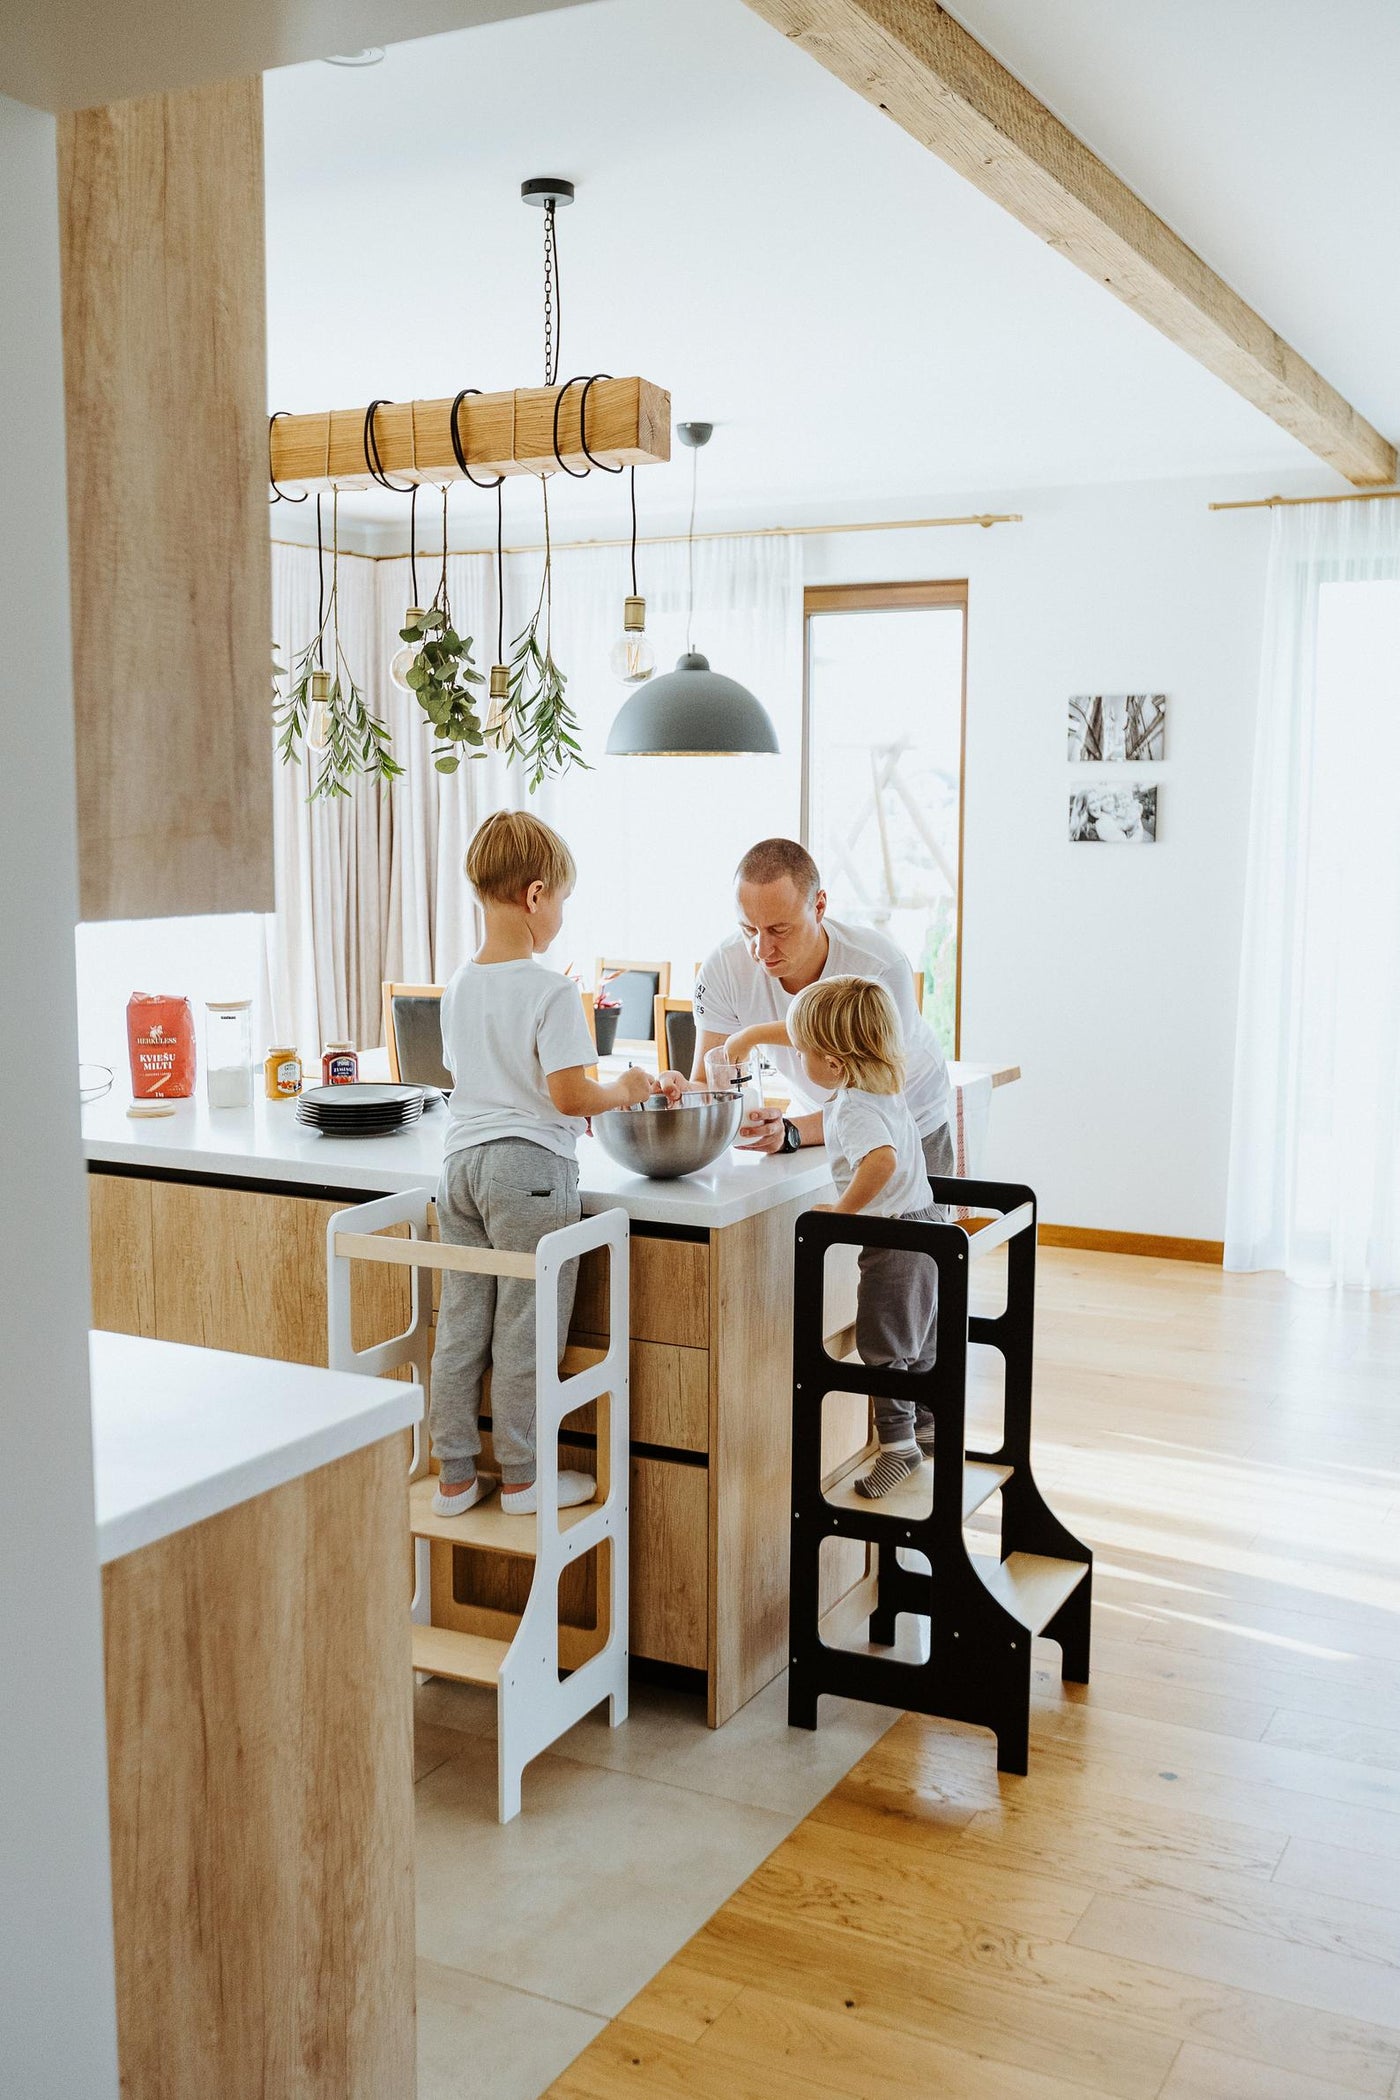 Children on Learning Towers with Father in Kitchen